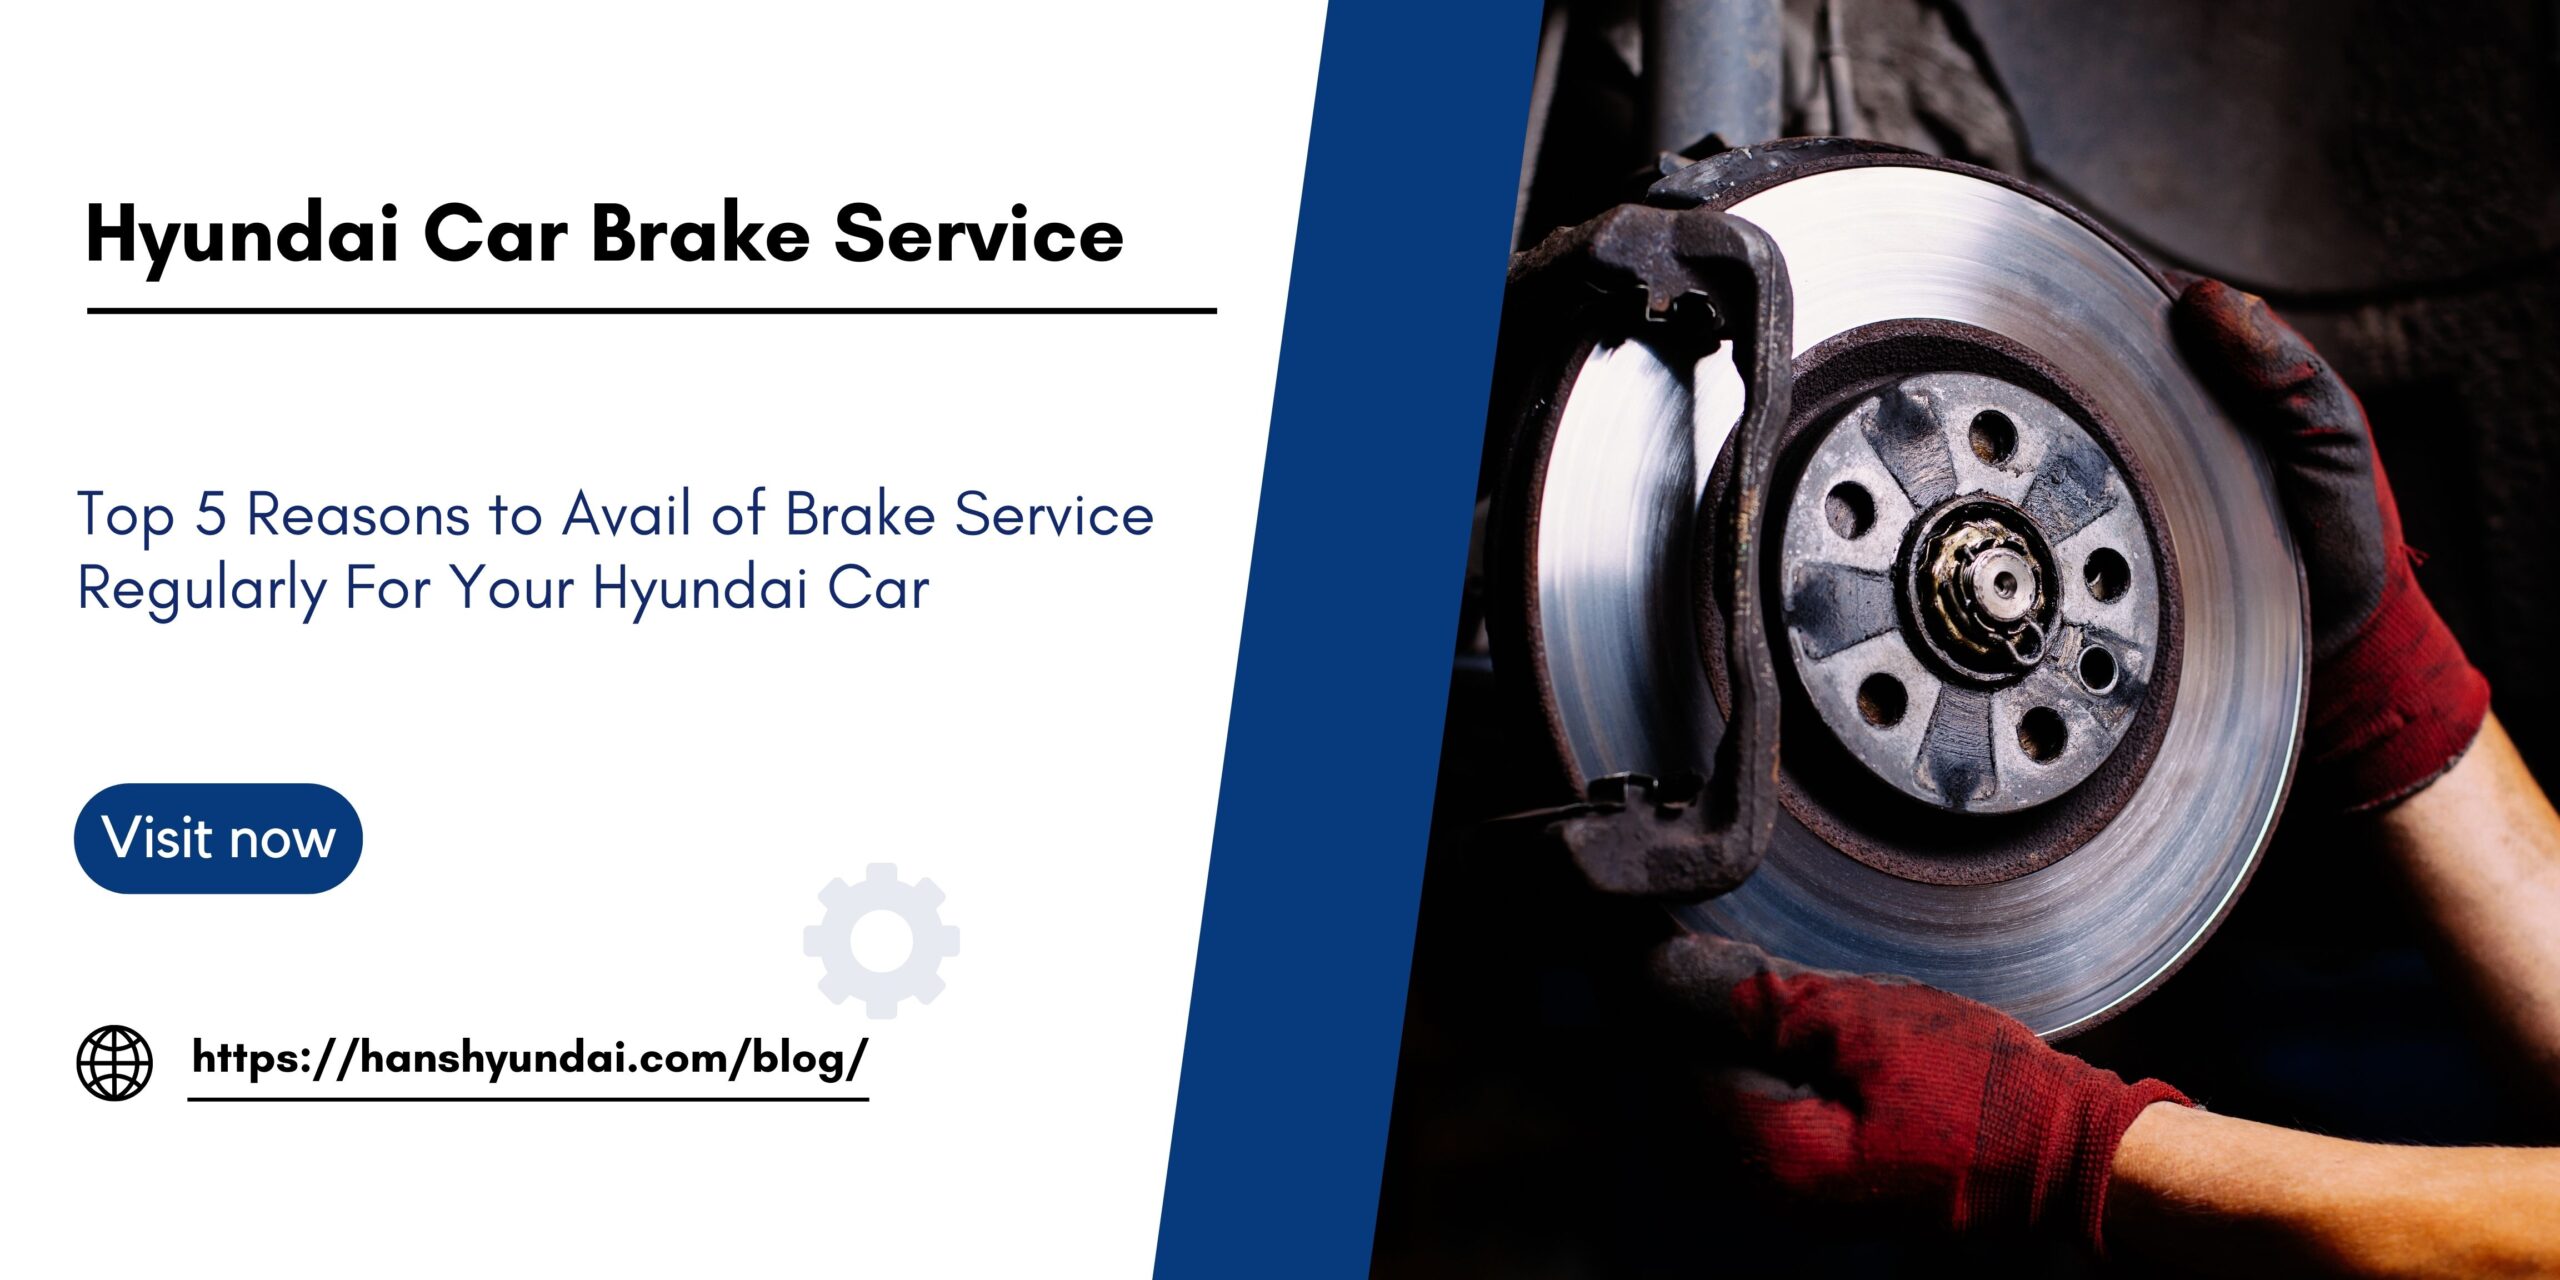 featured image of car brake service